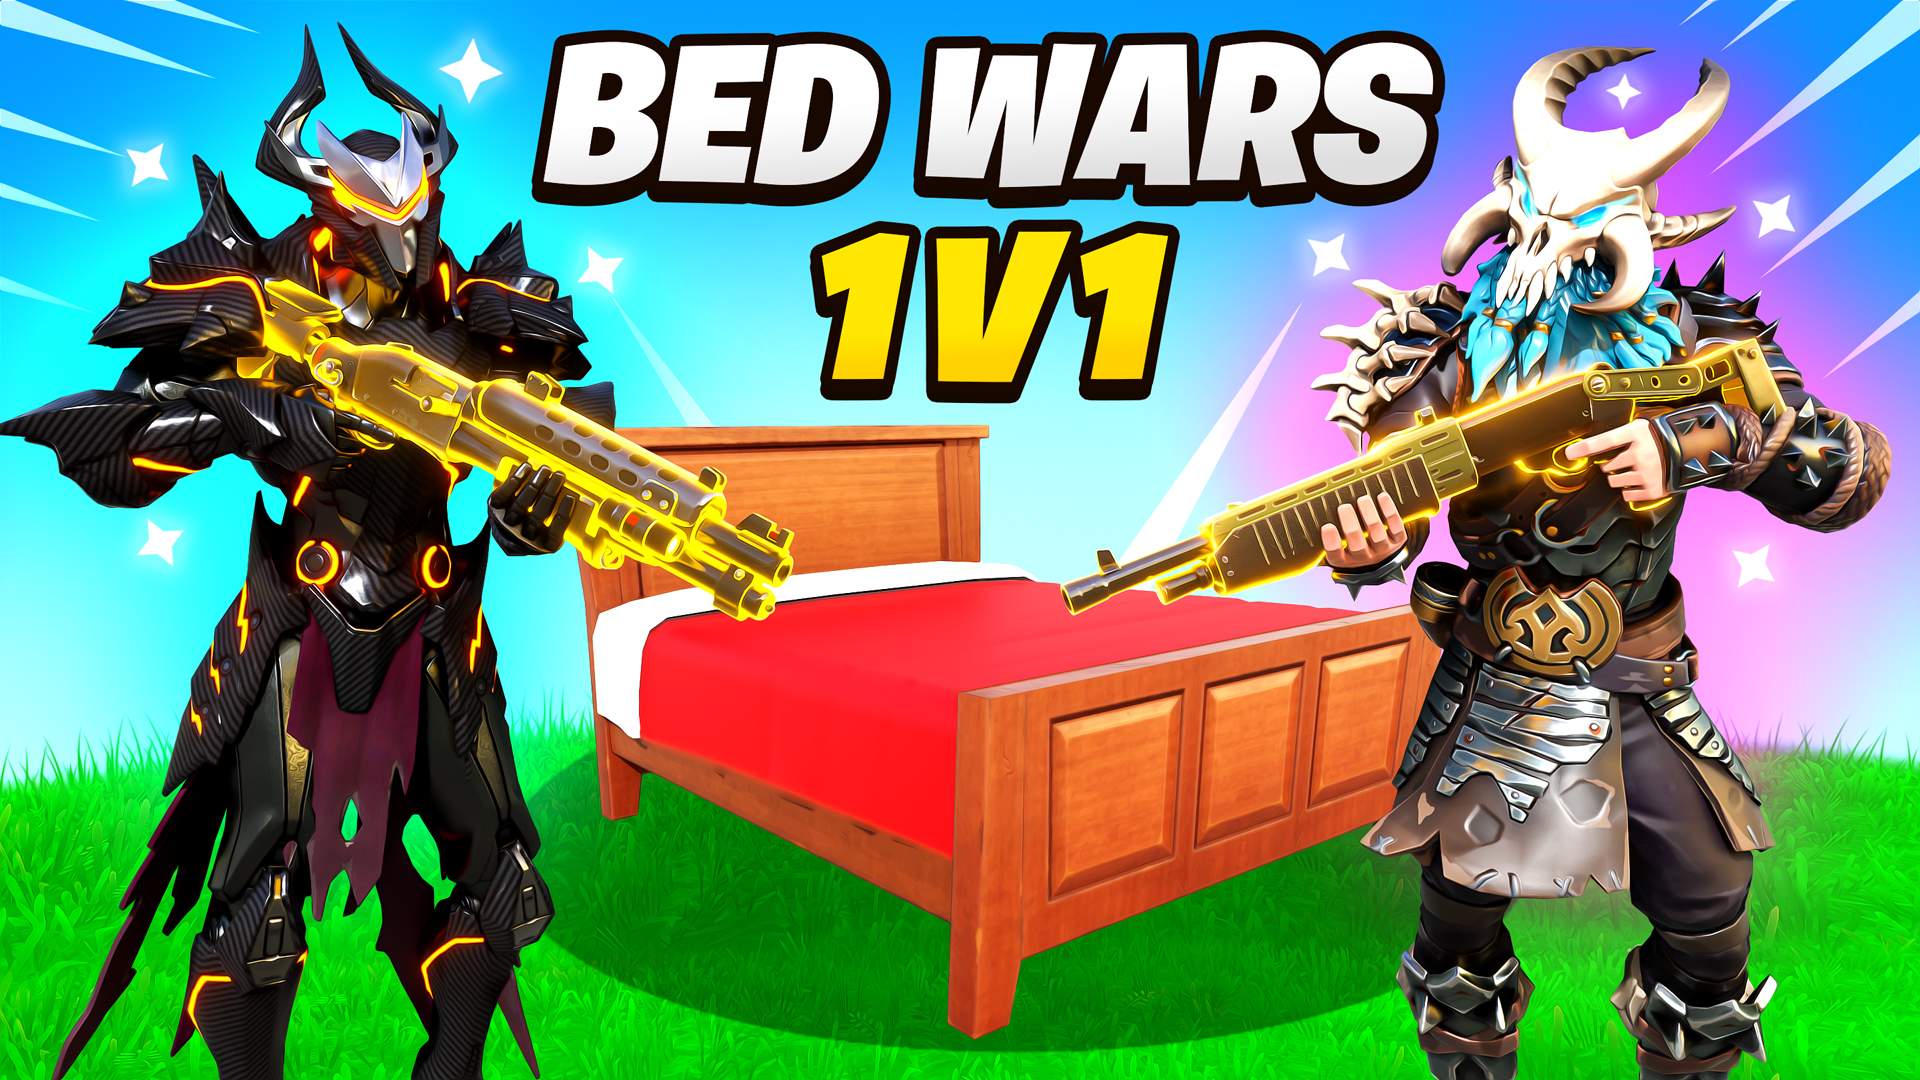 BED WARS TYCOON 1v1 🔴